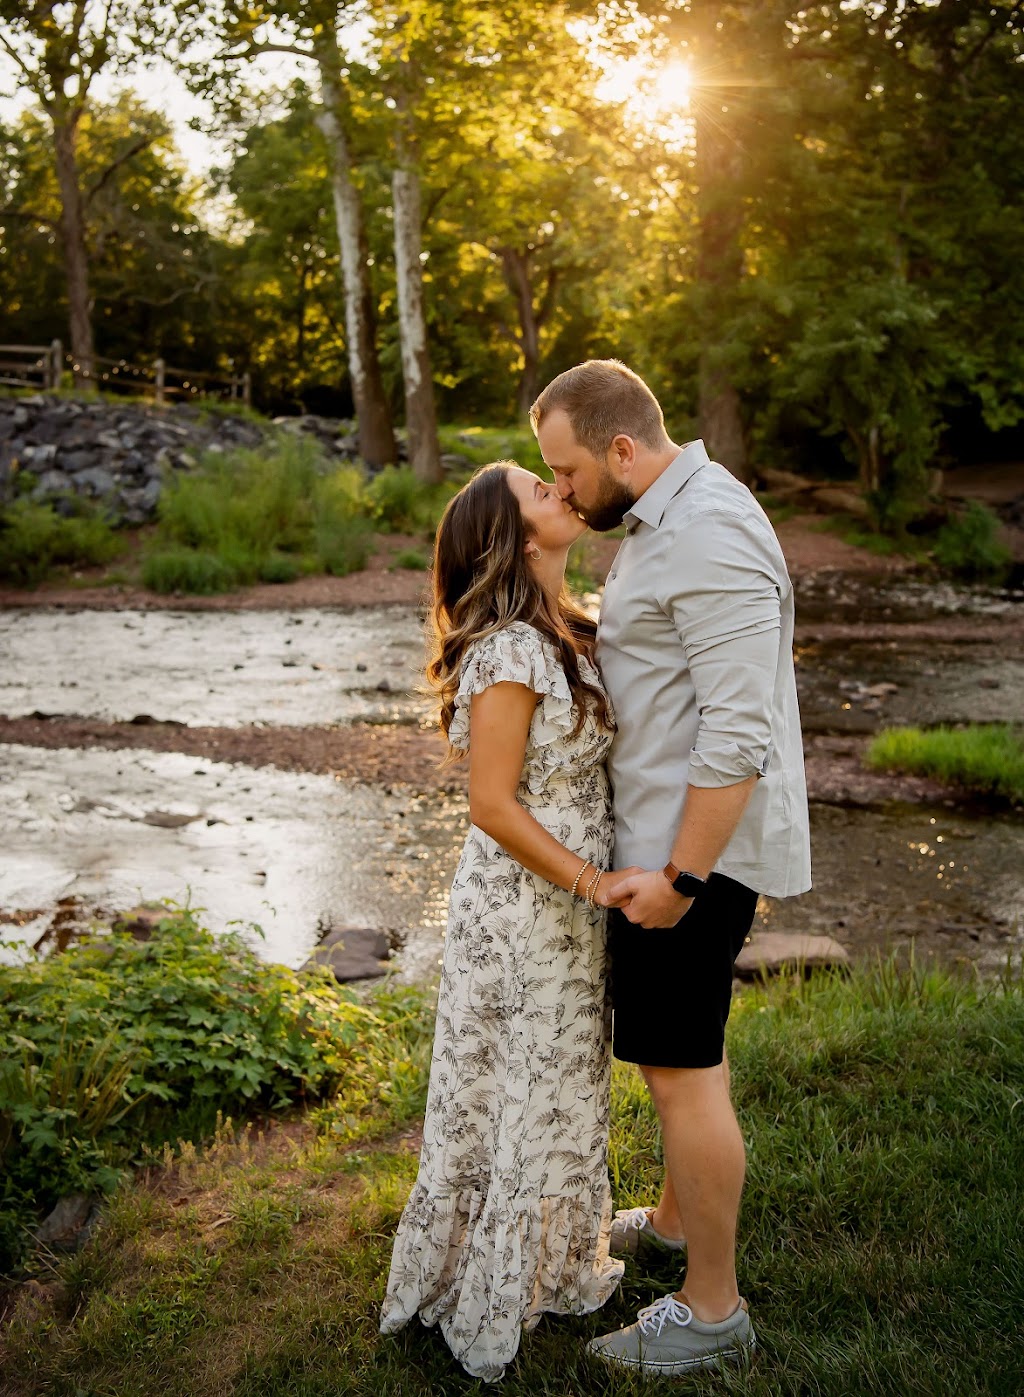 Lori Maguire Photography | 2261 Warner Rd, Lansdale, PA 19446 | Phone: (484) 991-8665